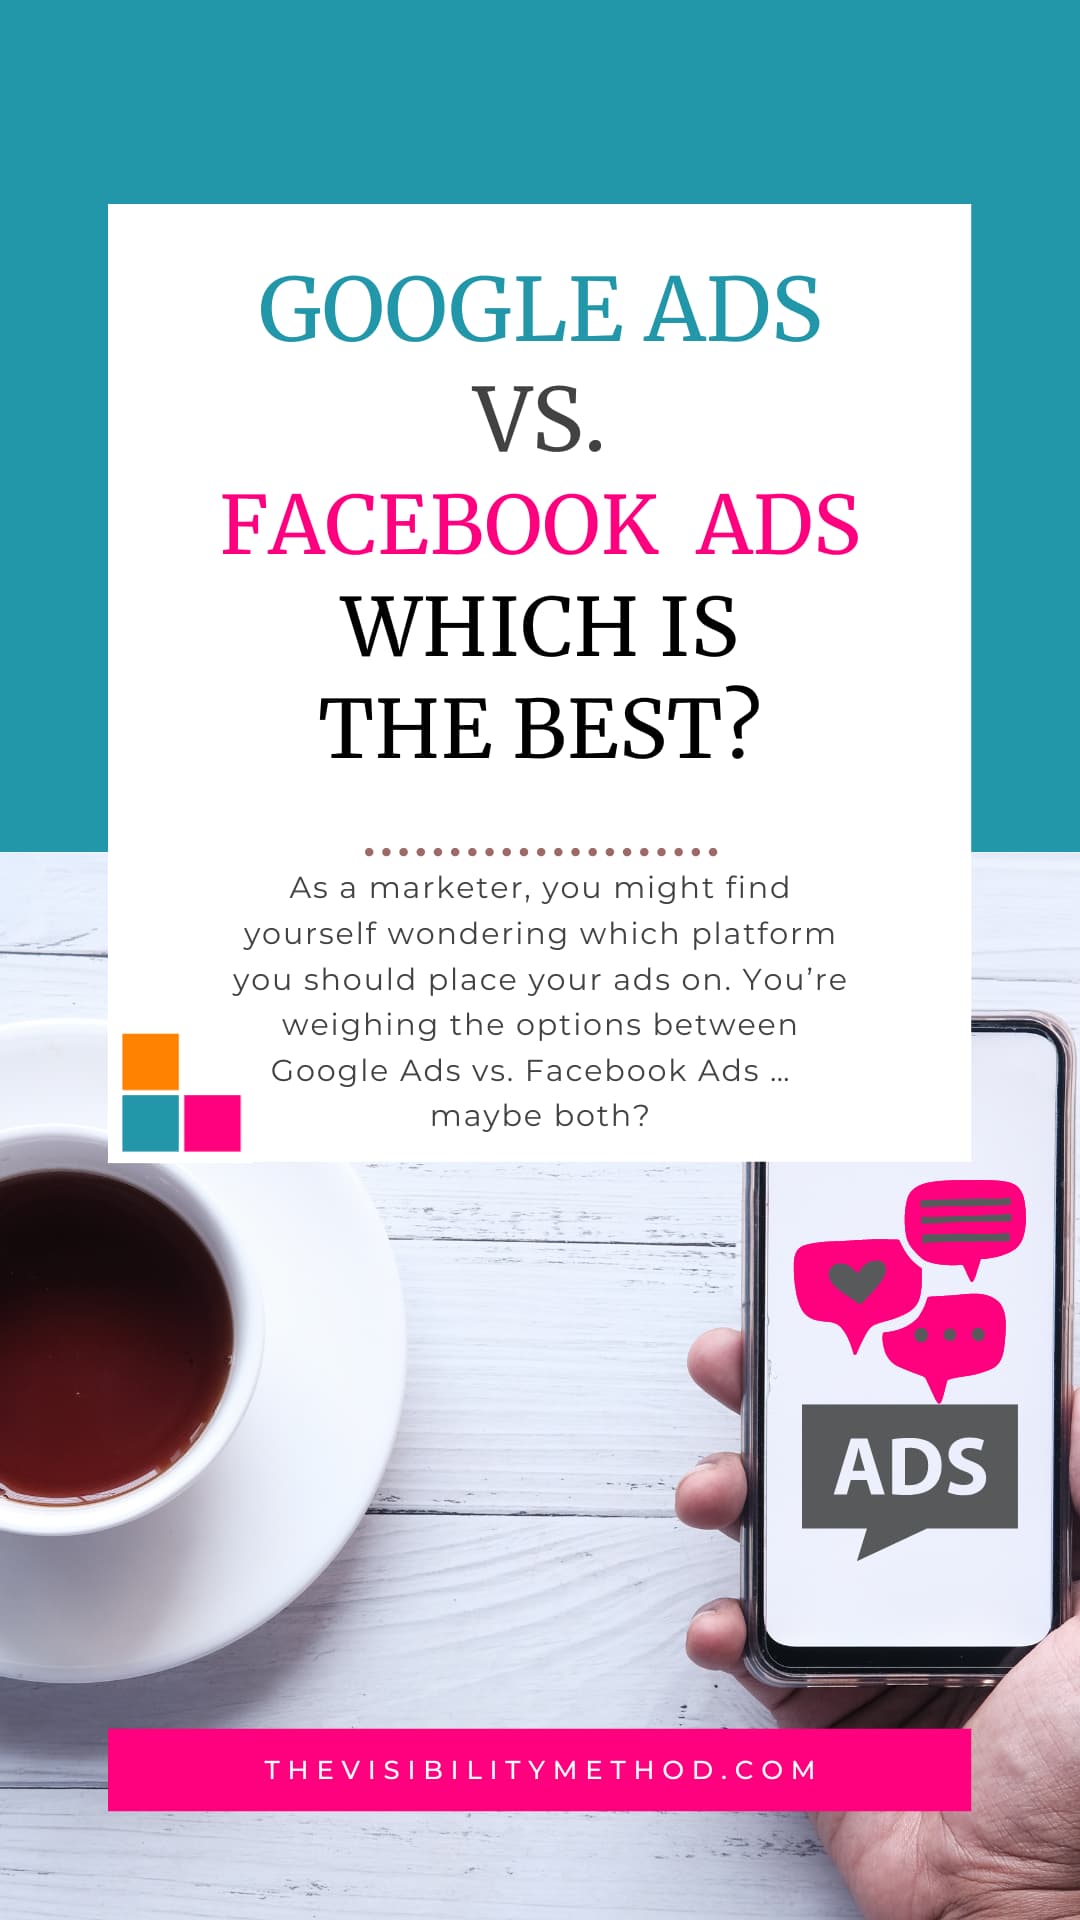 Google Ads vs. Facebook Ads: Which is the Best?